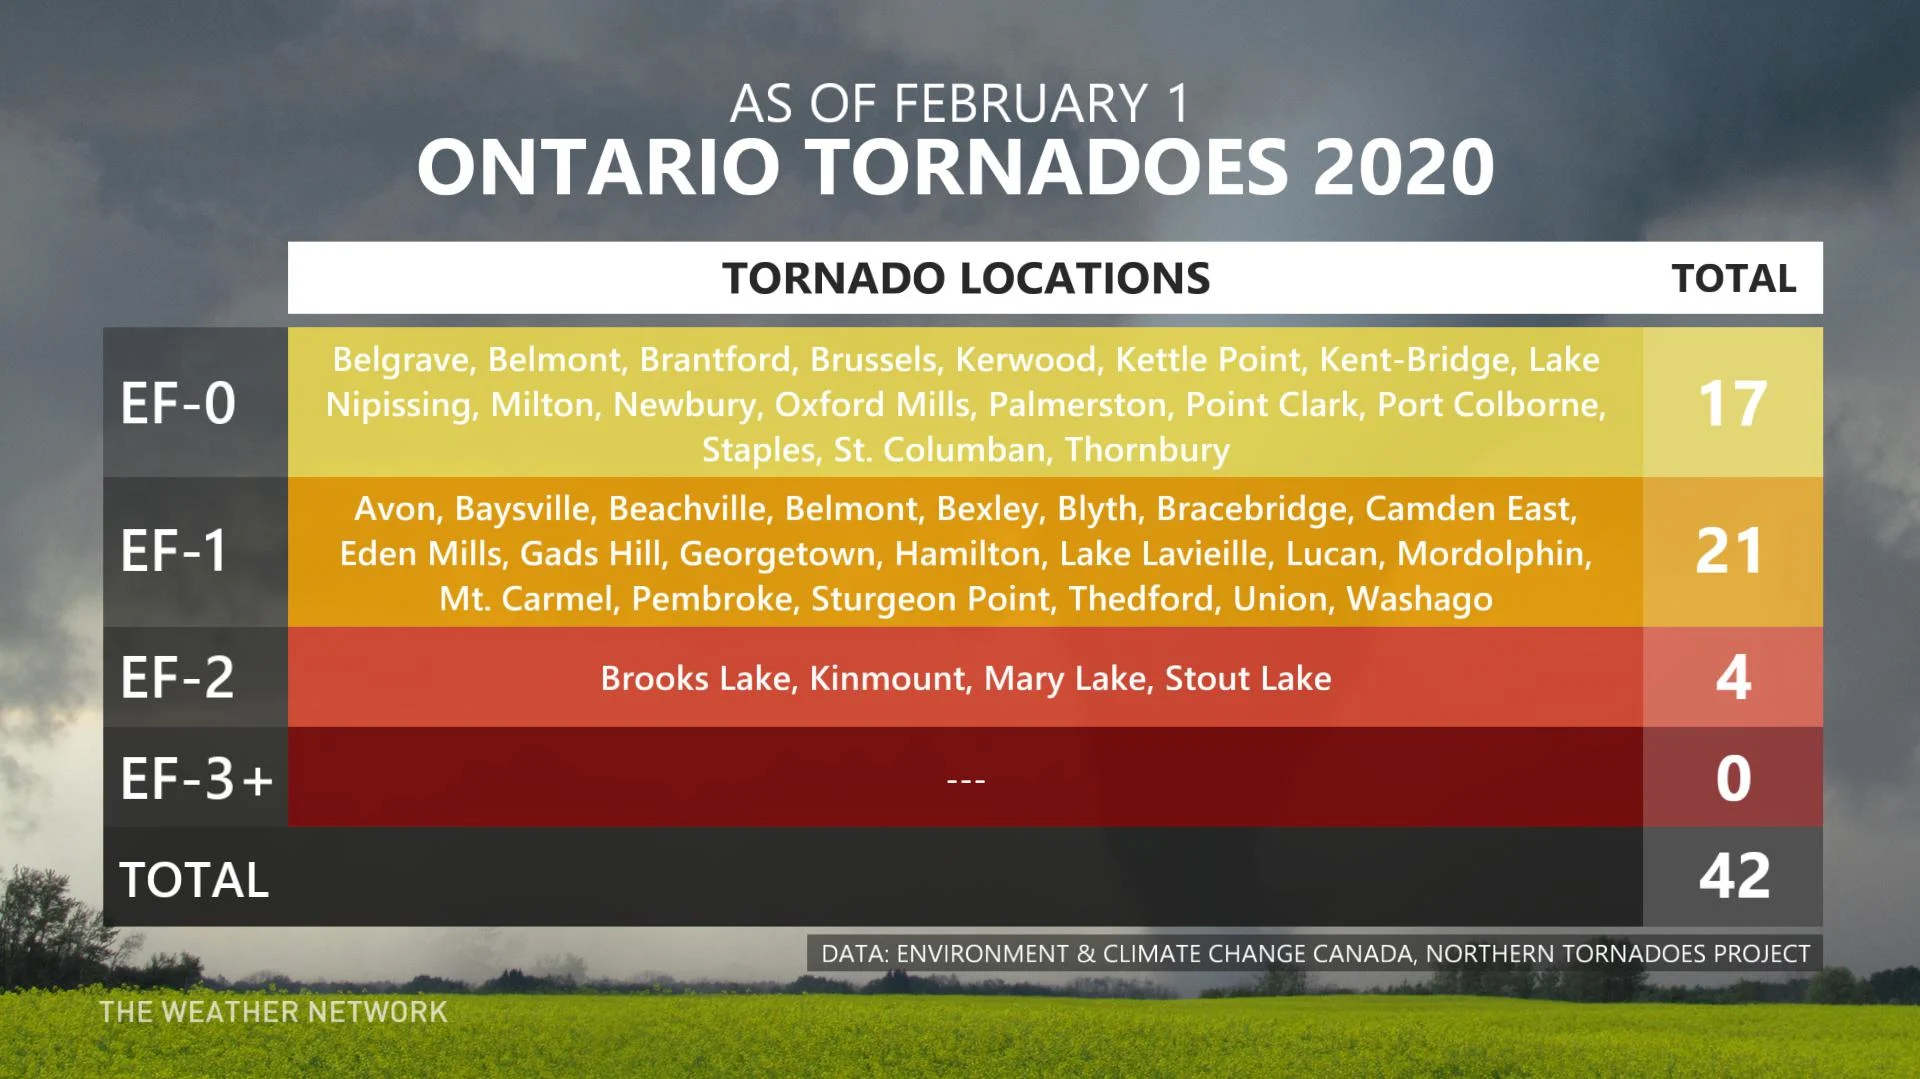 Ontario tornadoes 2020 (updated February 1)